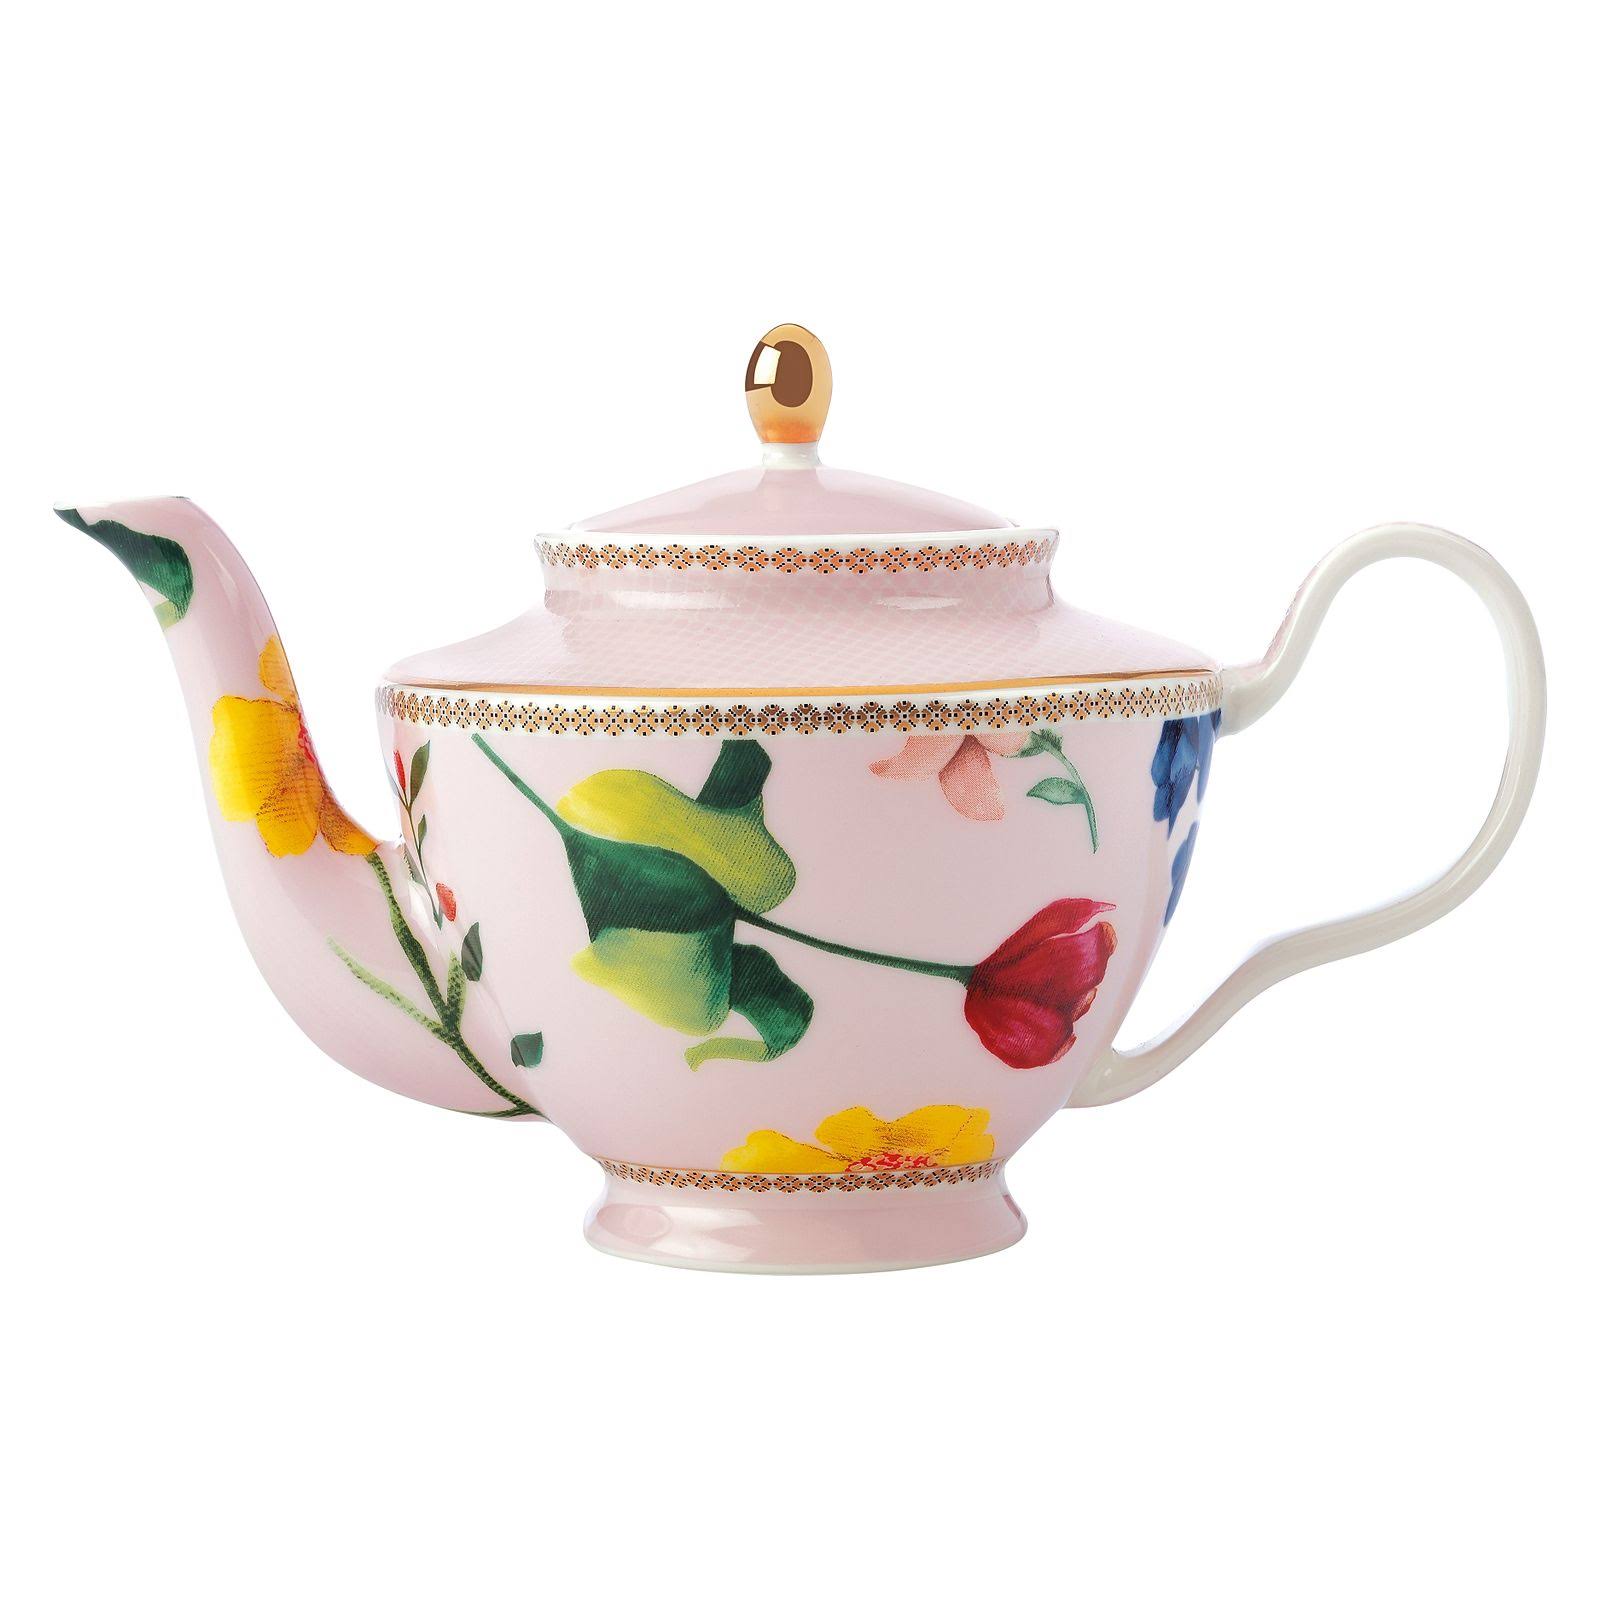 Maxwell & Williams Teas & C's Small Teapot with Infuser and Contessa Design